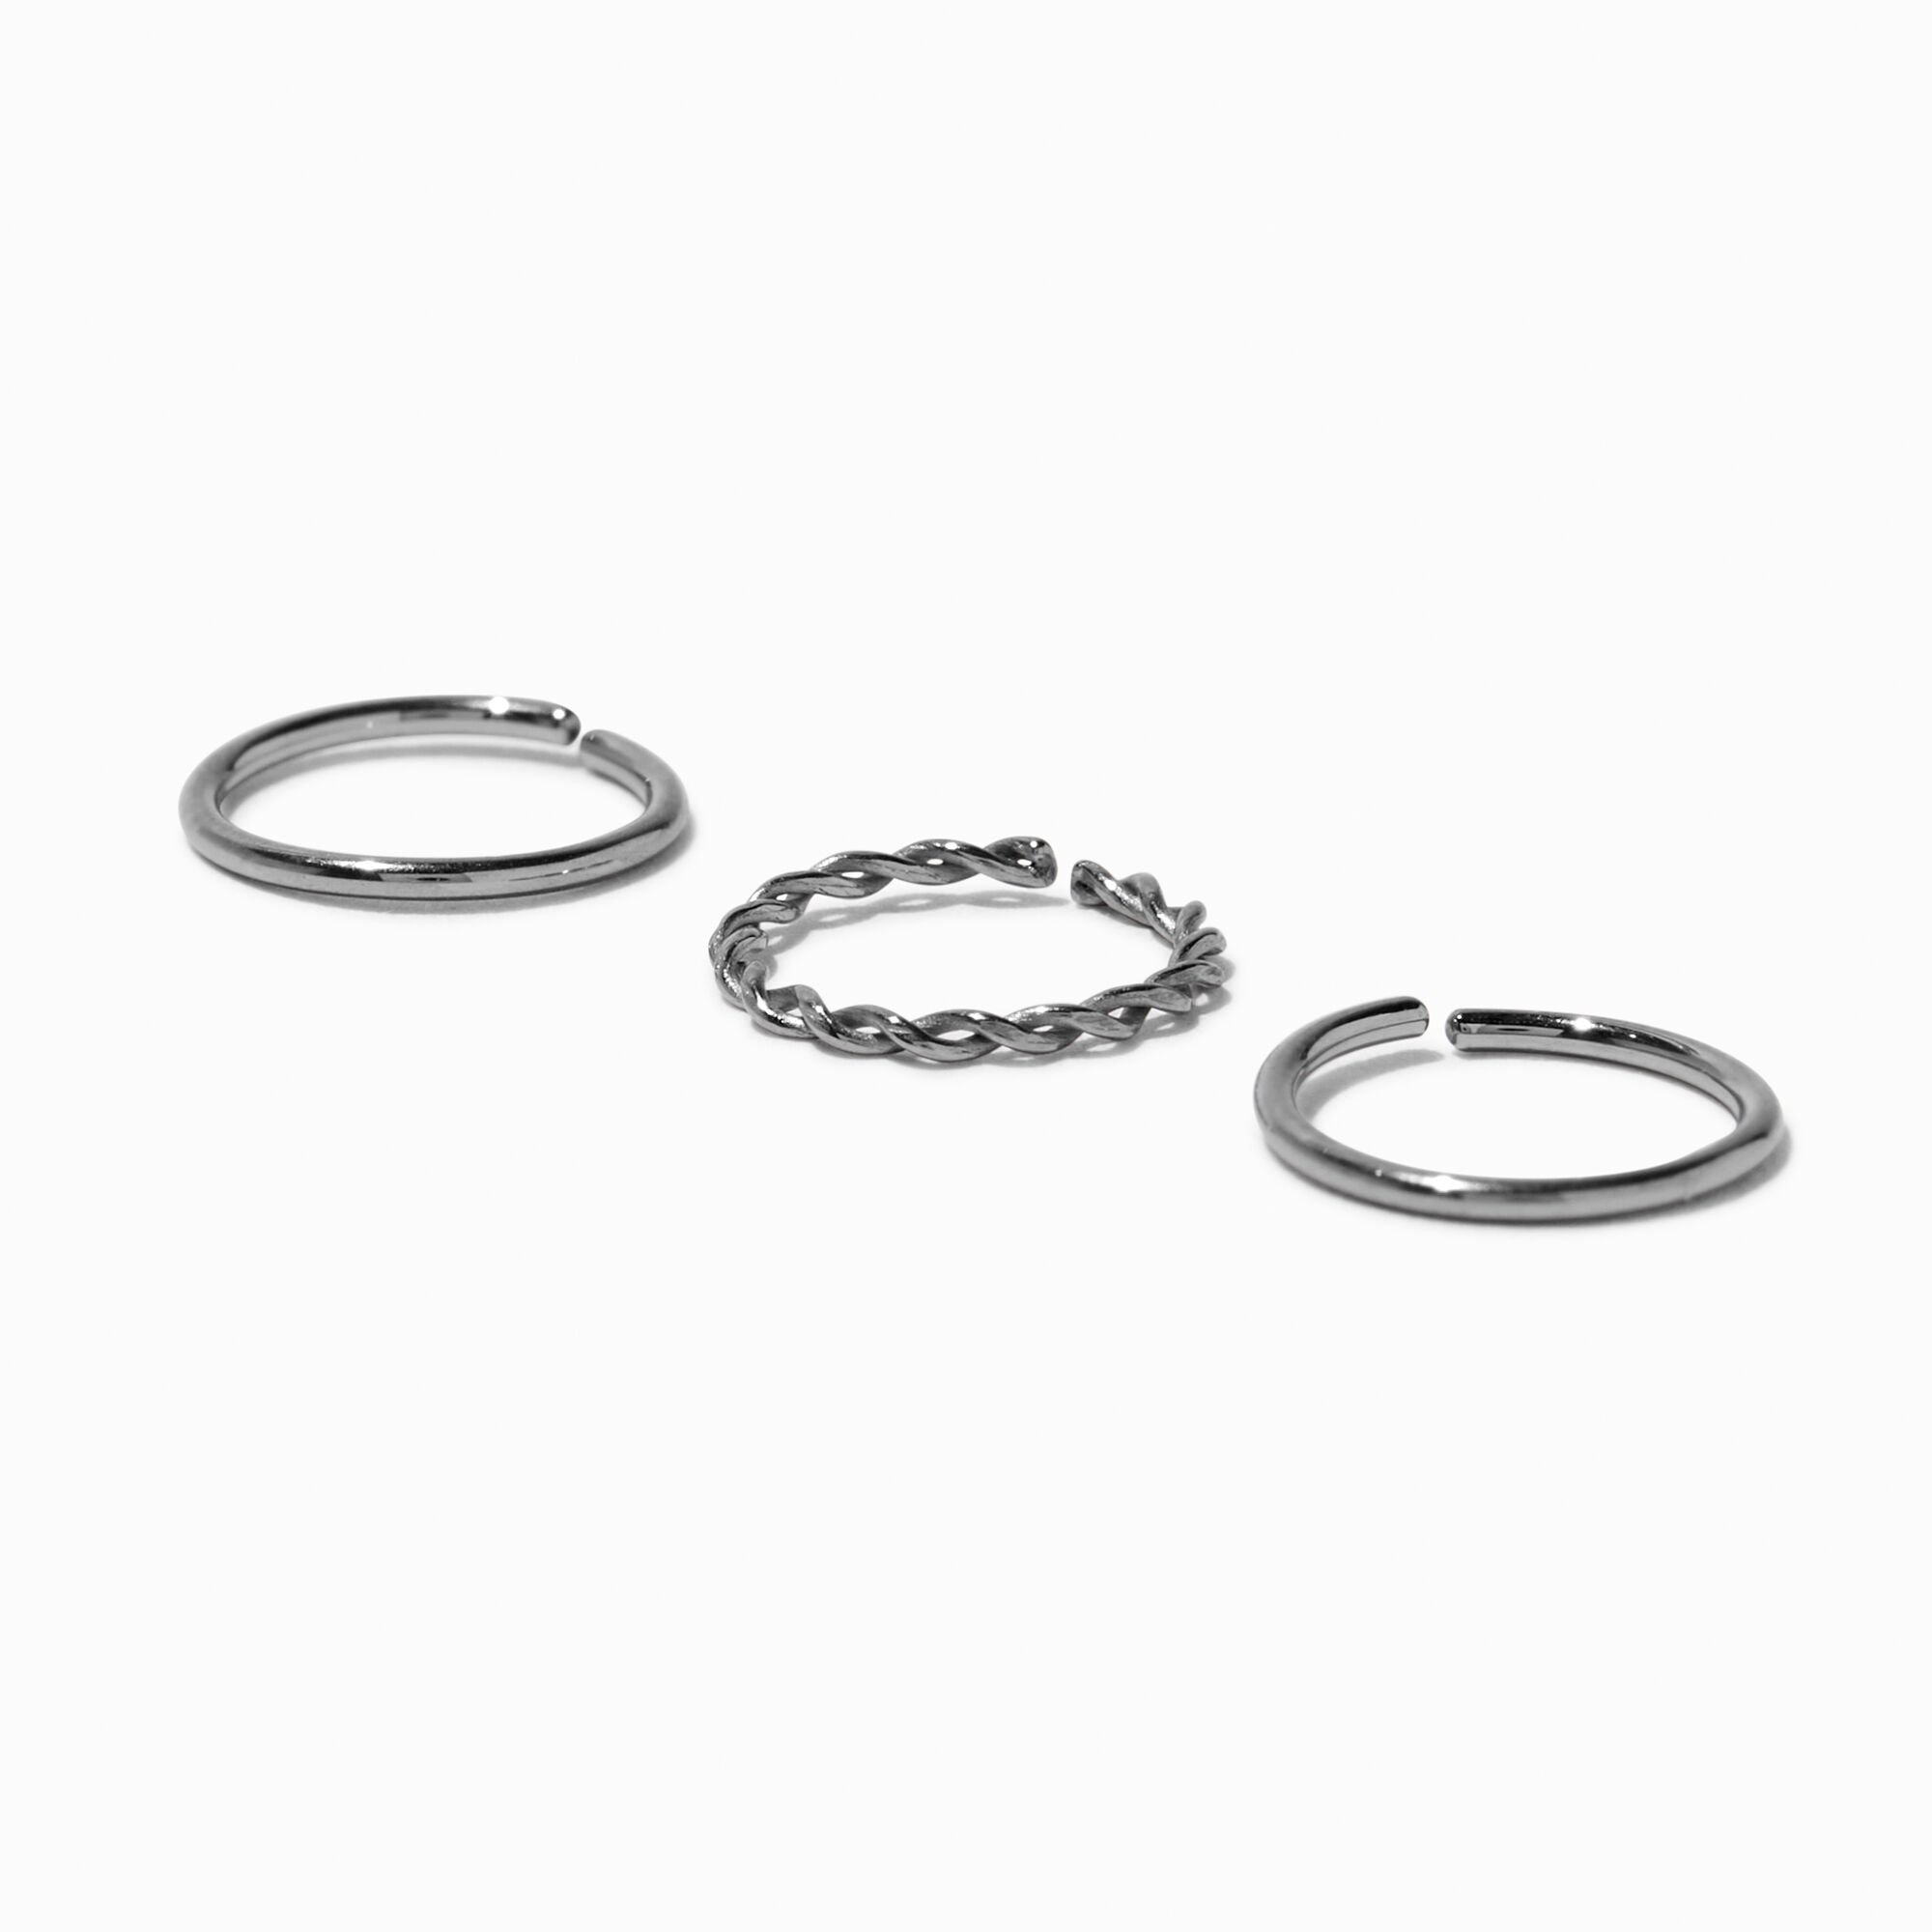 View Claires Tone Titanium Braided Smooth 20G Nose Hoop Rings 3 Pack Silver information